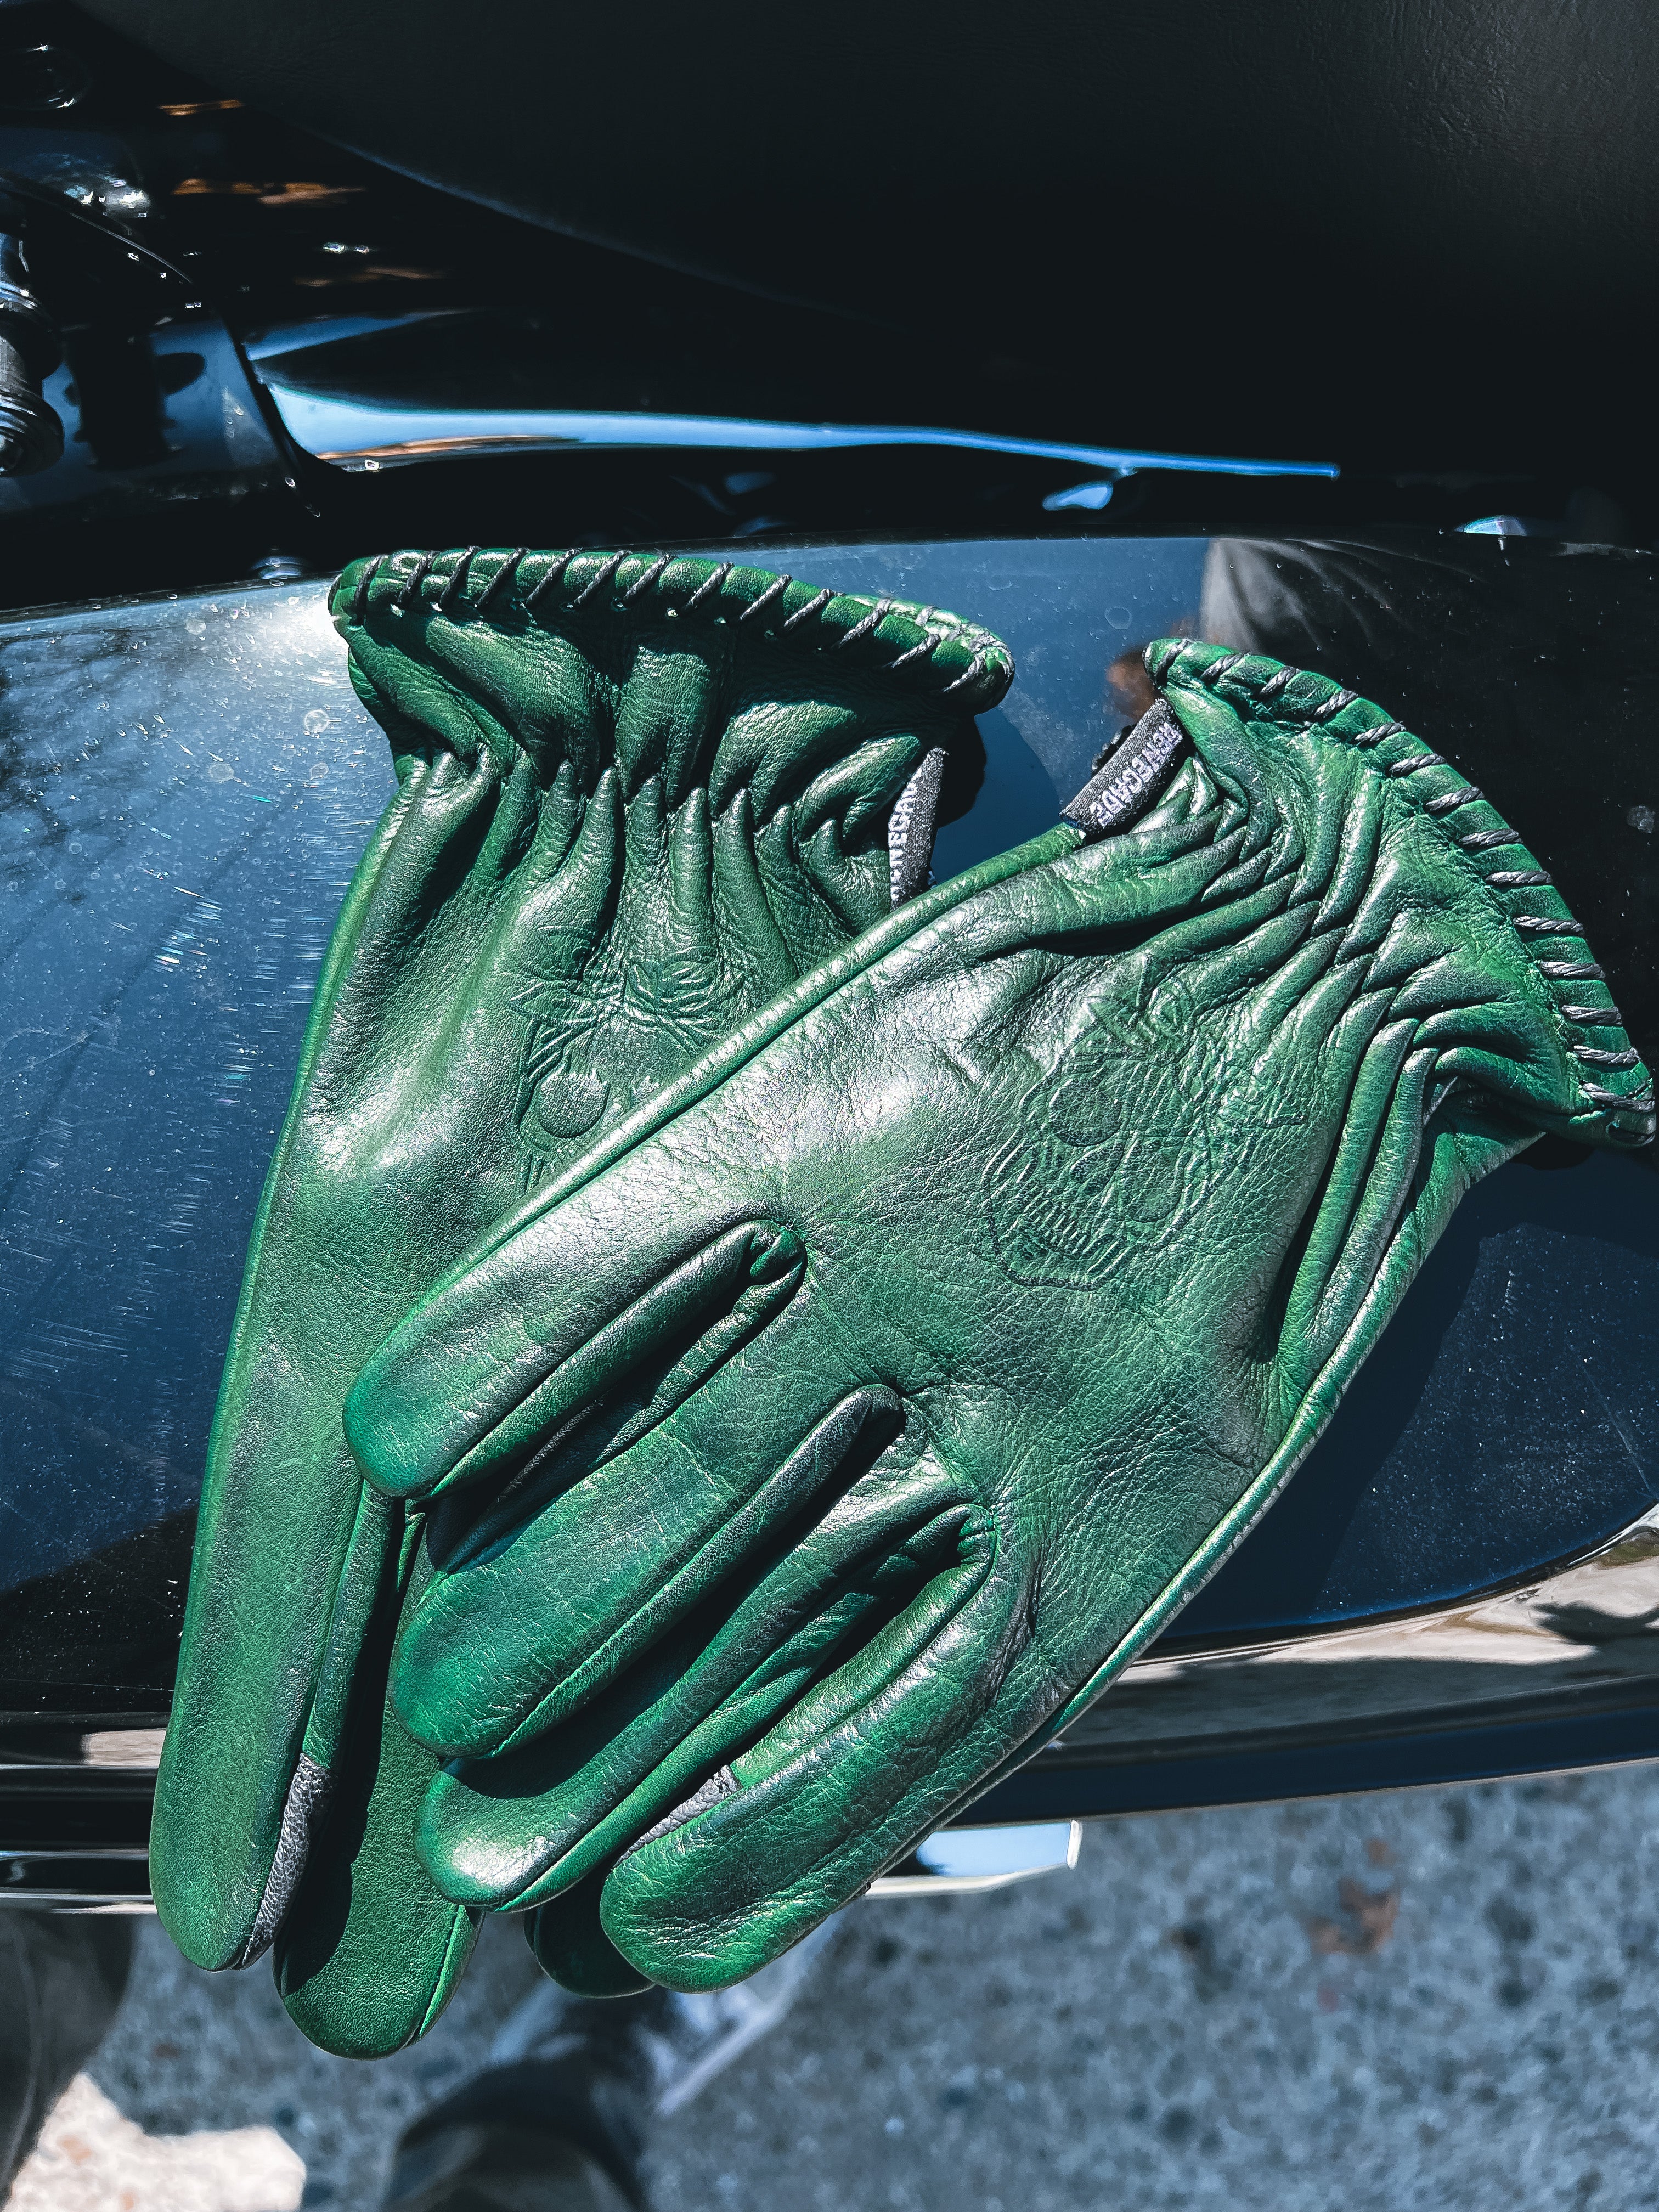 Green Distressed Leather Gloves